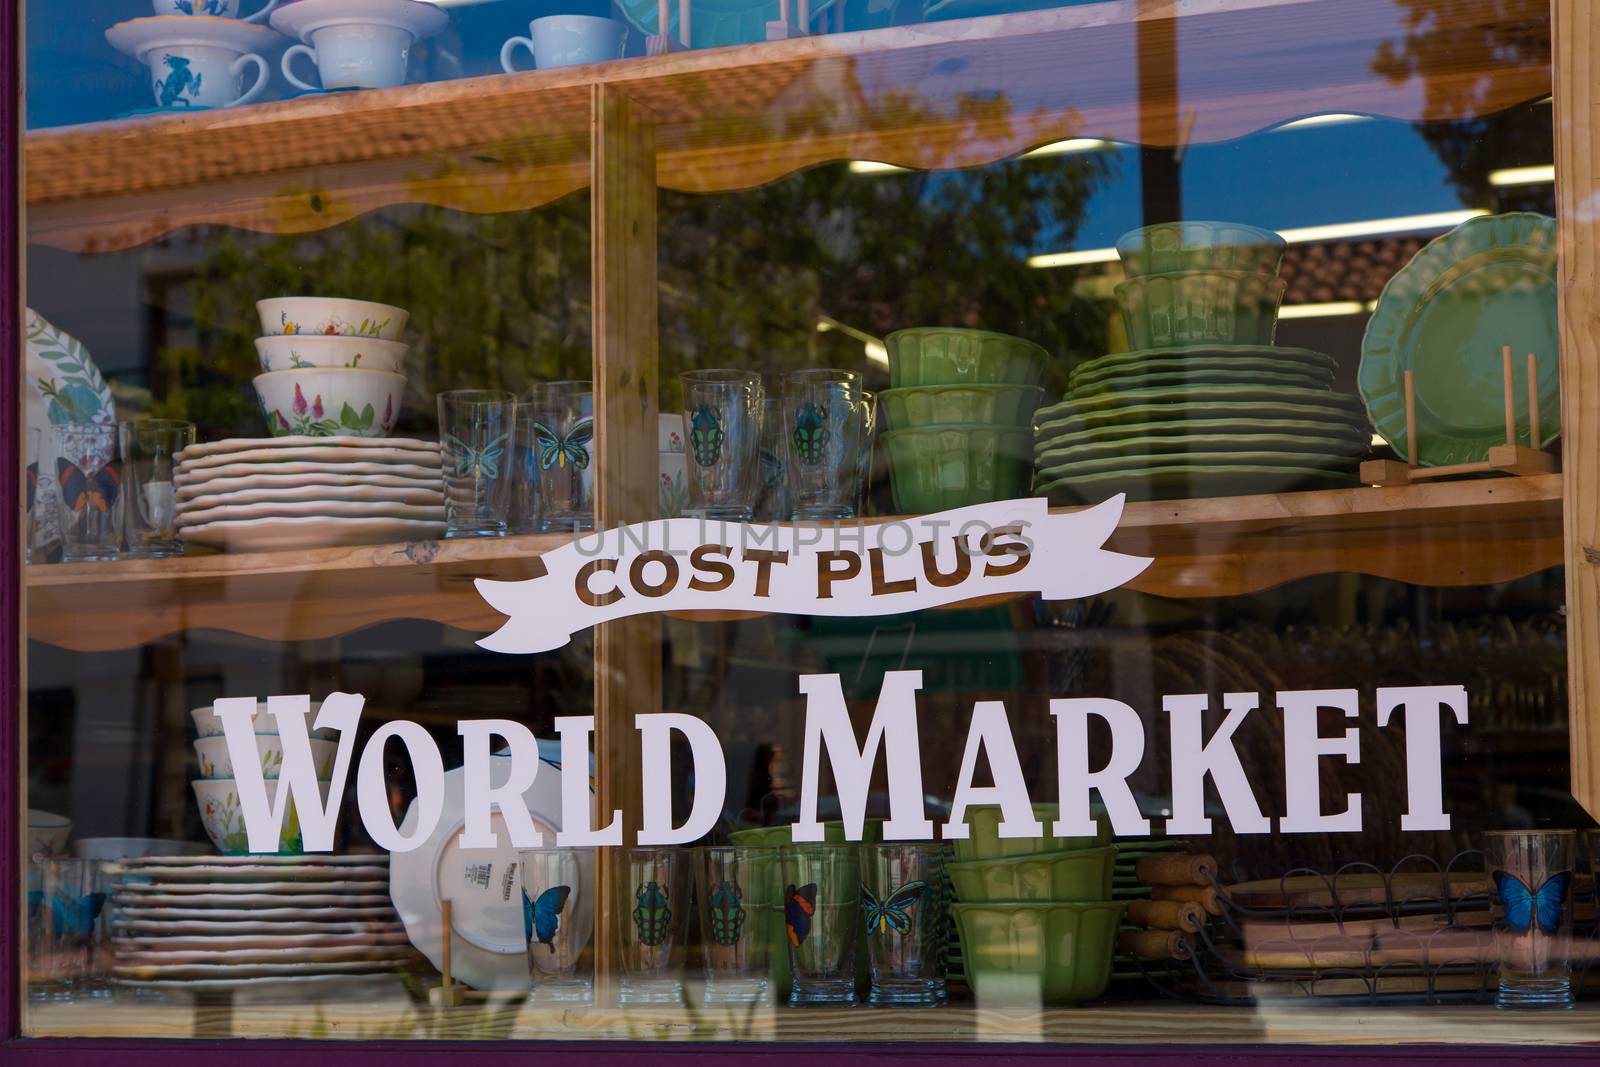 SANTA BARBARA, CA/USA - APRIL 30, 2016: Cost Plus World Market store. Cost Plus World Market is a import retail stores and a subsidiary of Bed Bath & Beyond.